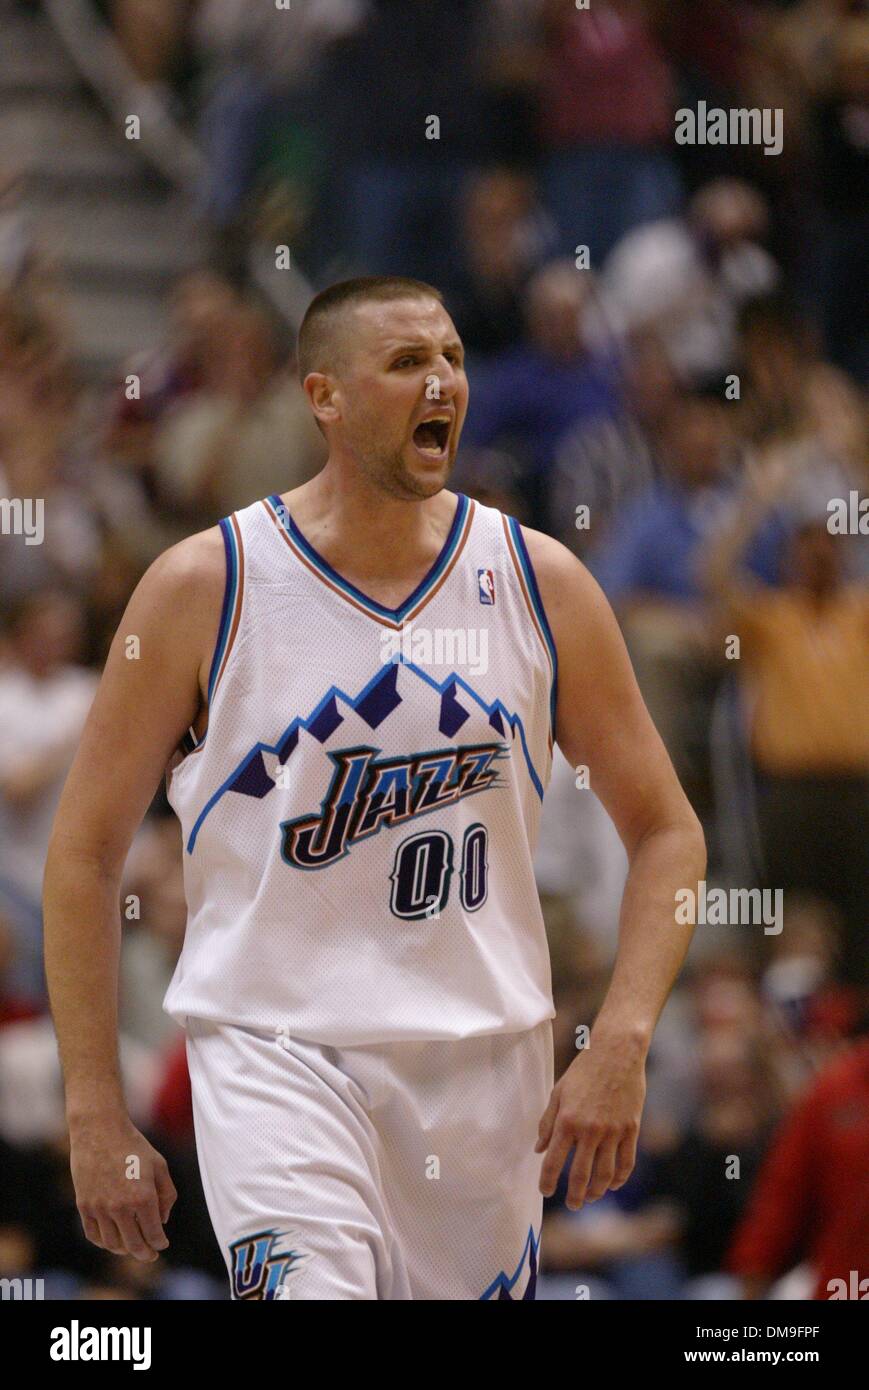 Greg Ostertag yells in the third quarter of game 3 in the Western conference Playoffs between the Sacramednto Kings and the Utah Jazz at the Delta Center, Salt Lake City, Utah, Saturday, April 26, 2003. Sacramento Bee photograph by Bryan Patrick/ZUMA Press Stock Photo